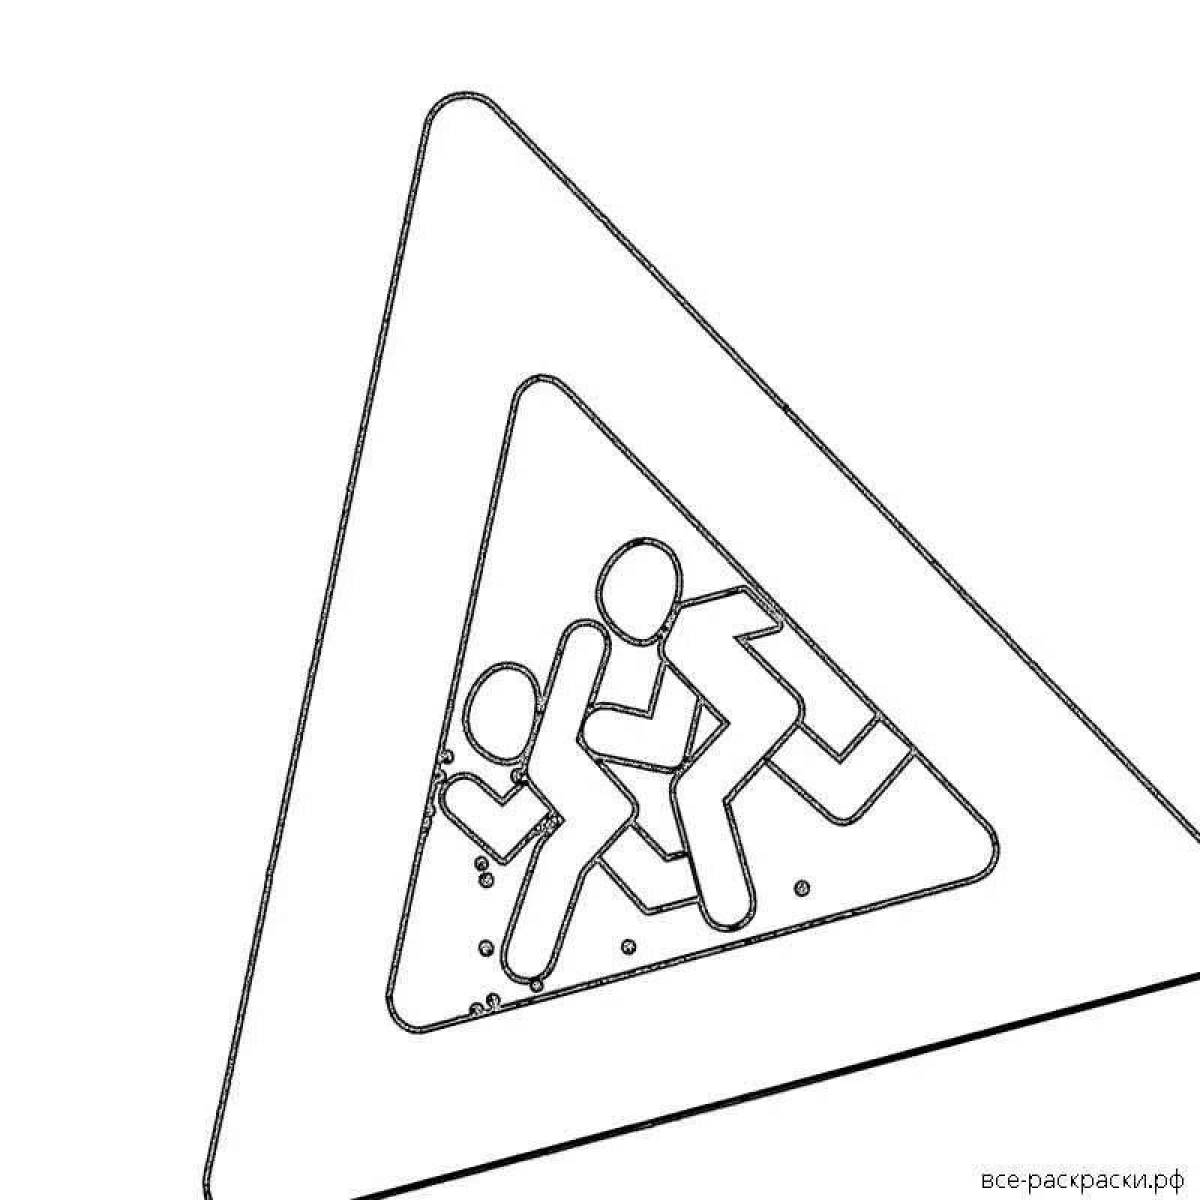 Coloring page animated roadwork sign